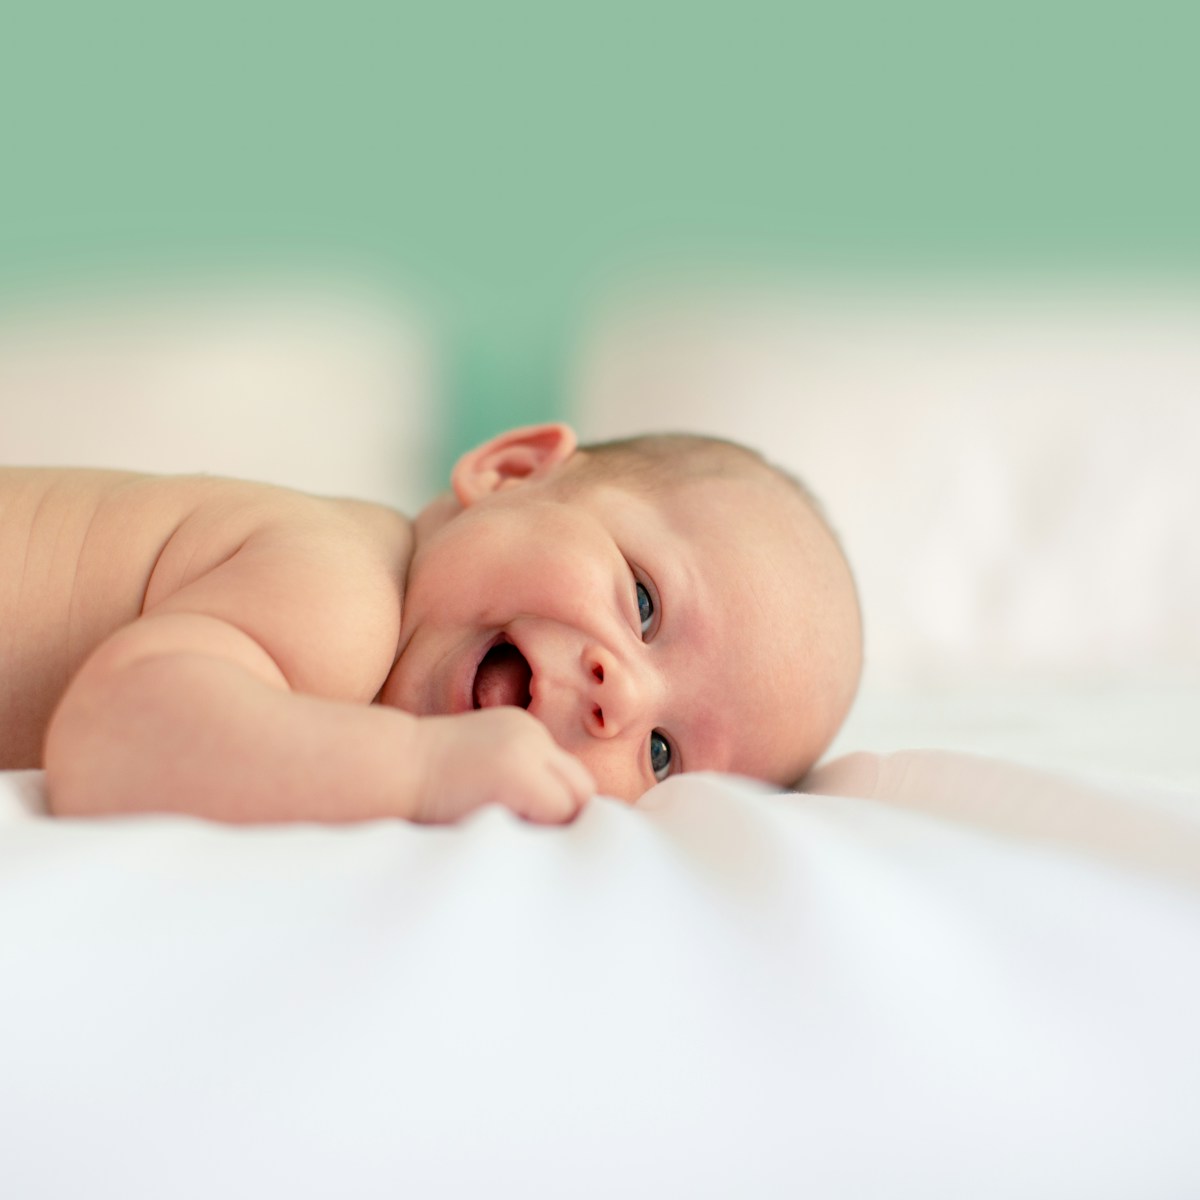 Click the link to find out more about what is involved in the Baby Massage Class